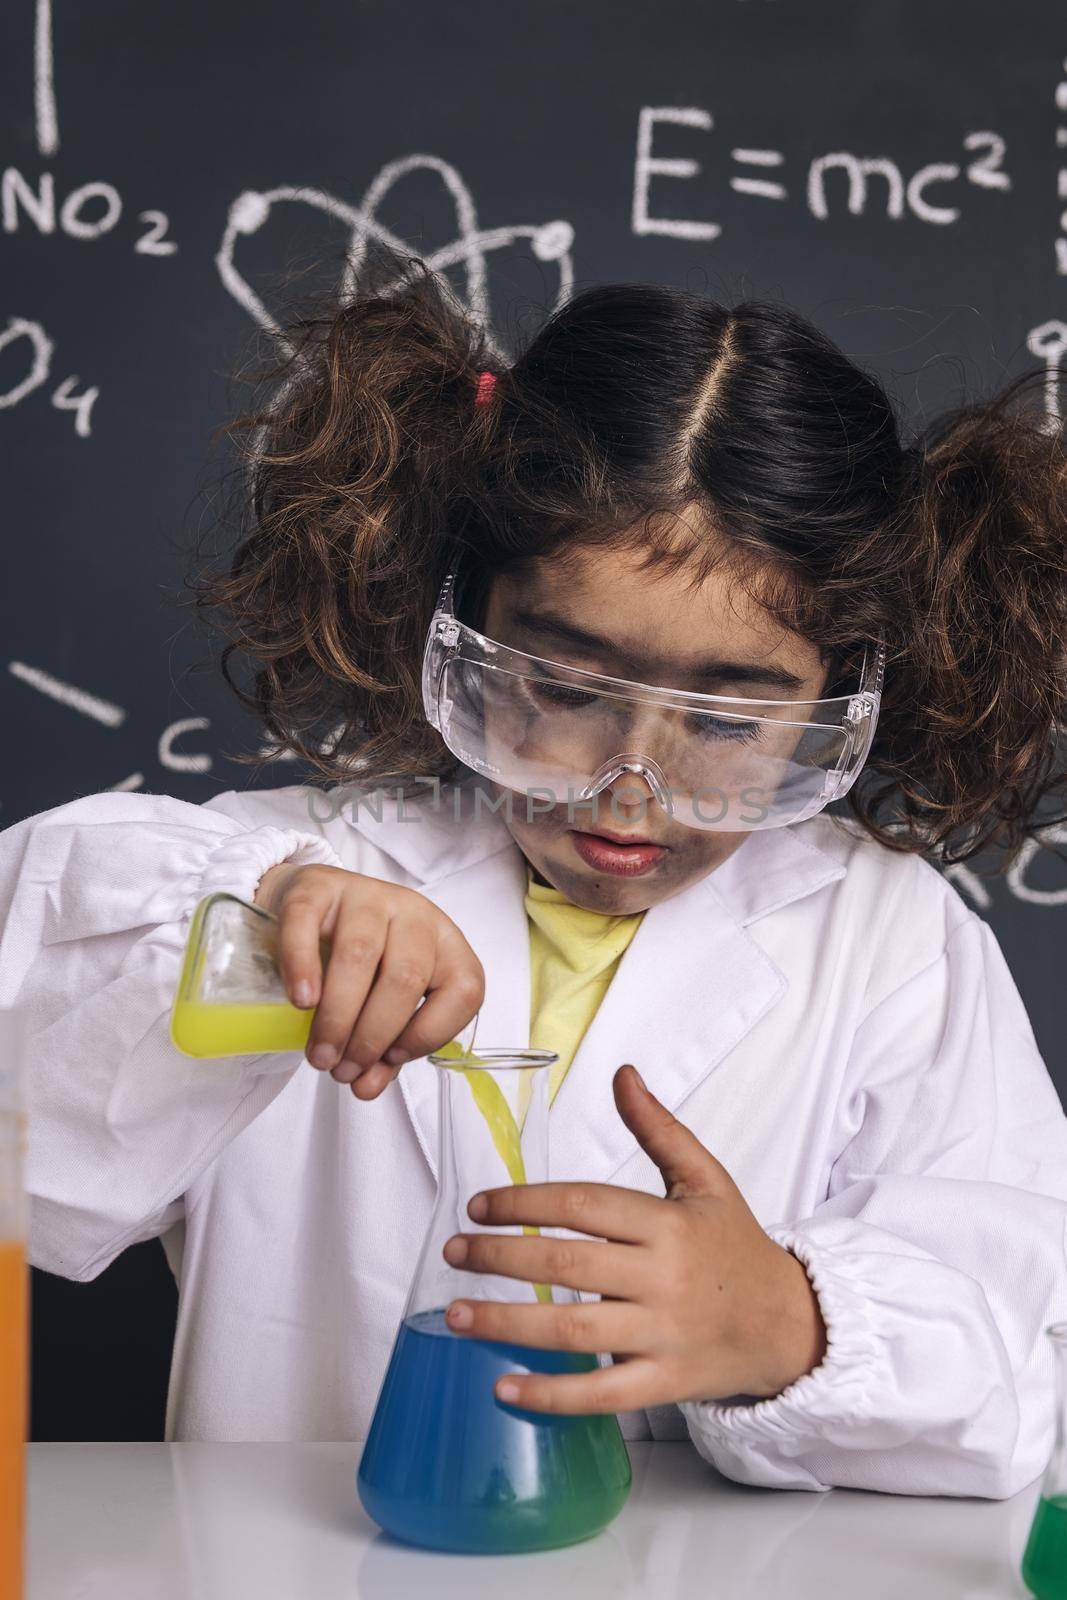 scientist kid with goggles and gloves in lab coat mixing chemical liquids in flasks, blackboard background with science formulas, explosion in the laboratory, back to school concept, vertical photo